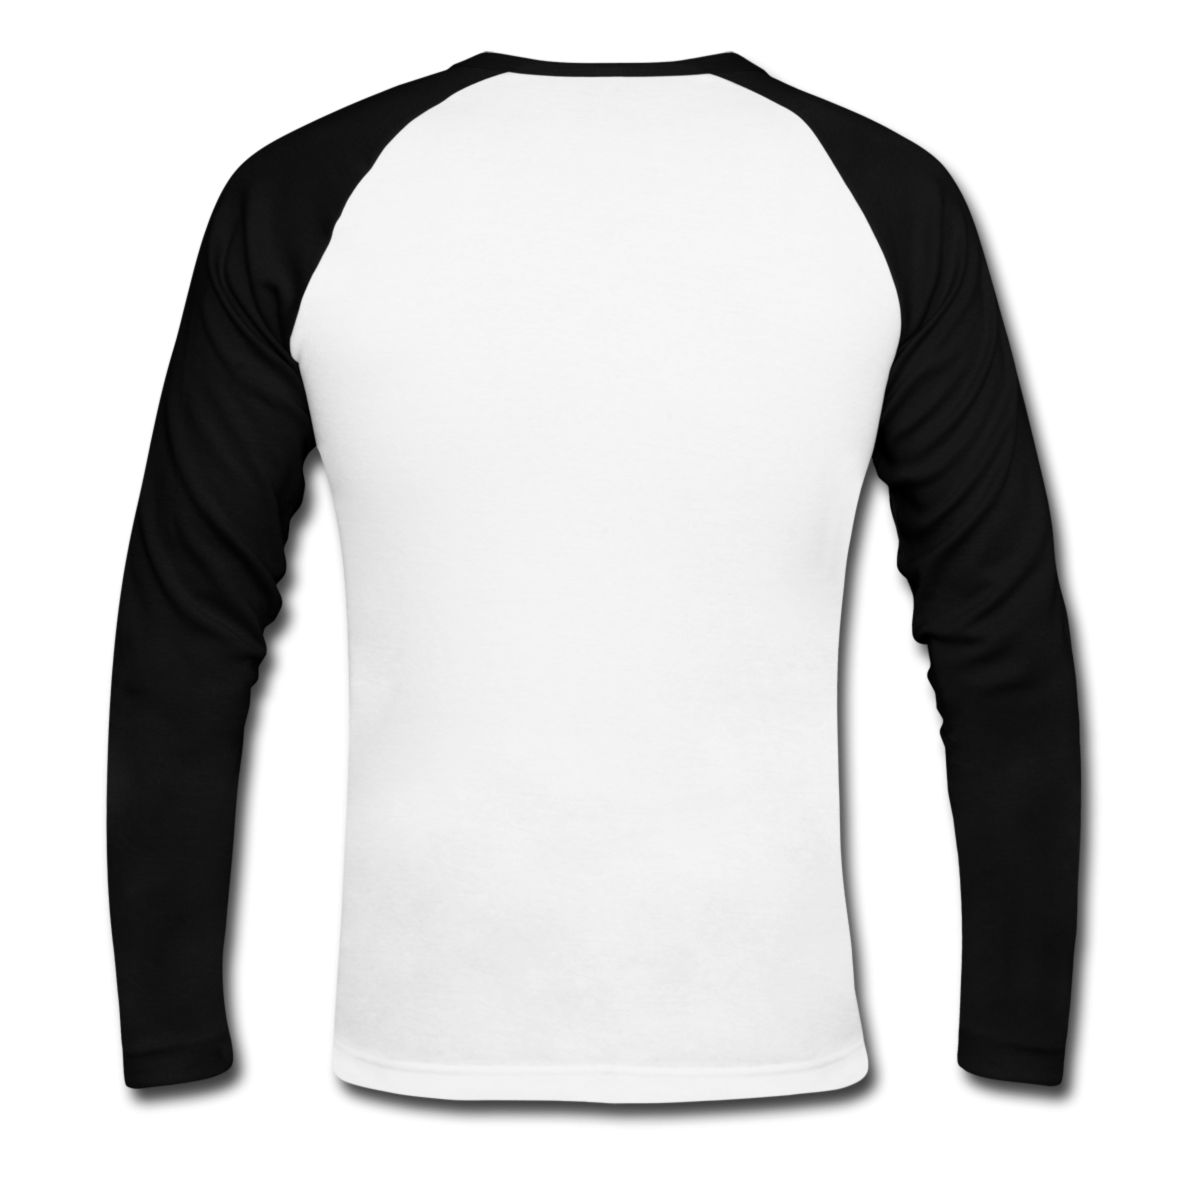 Download Free Download Blank T Shirt Icon Vectors PNG Transparent ...